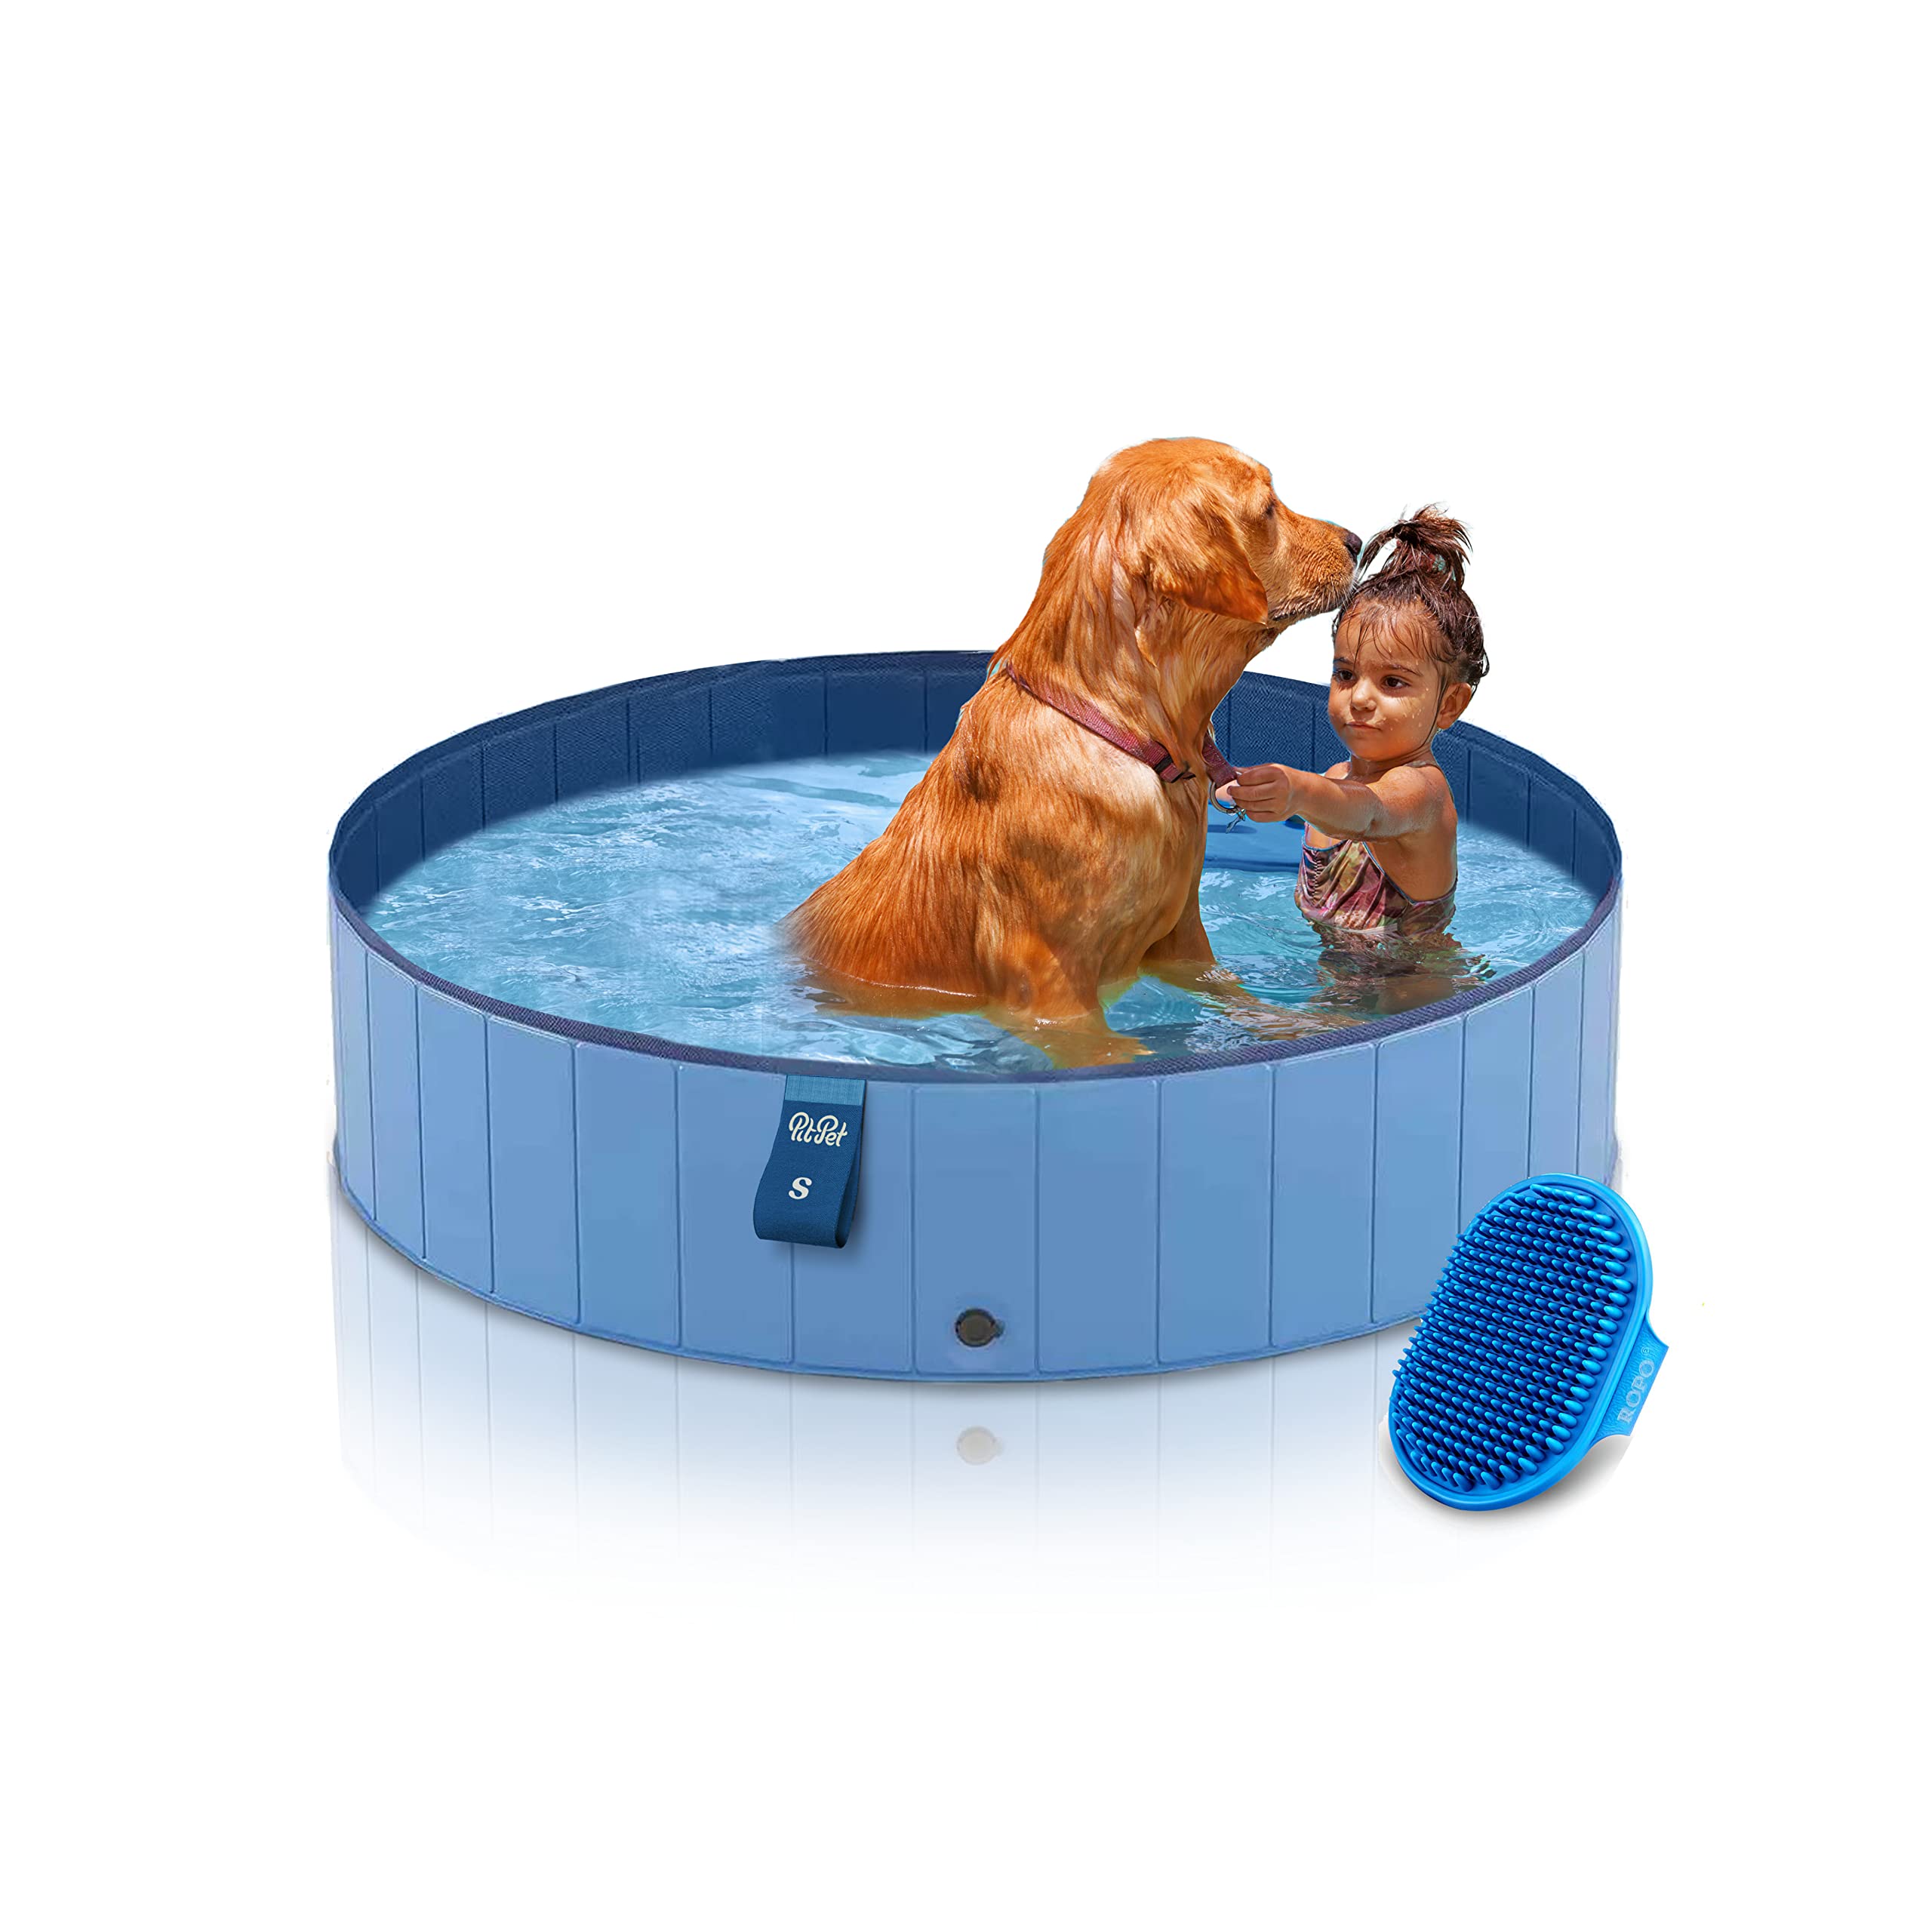 Heavy Duty Foldable Dog Pool for Large Dogs - Collapsible Pet Swimming Pool - Non-Slip Collapsible Dog Pet Pool Bathing Tub - (Small 32" Inches)  - Like New